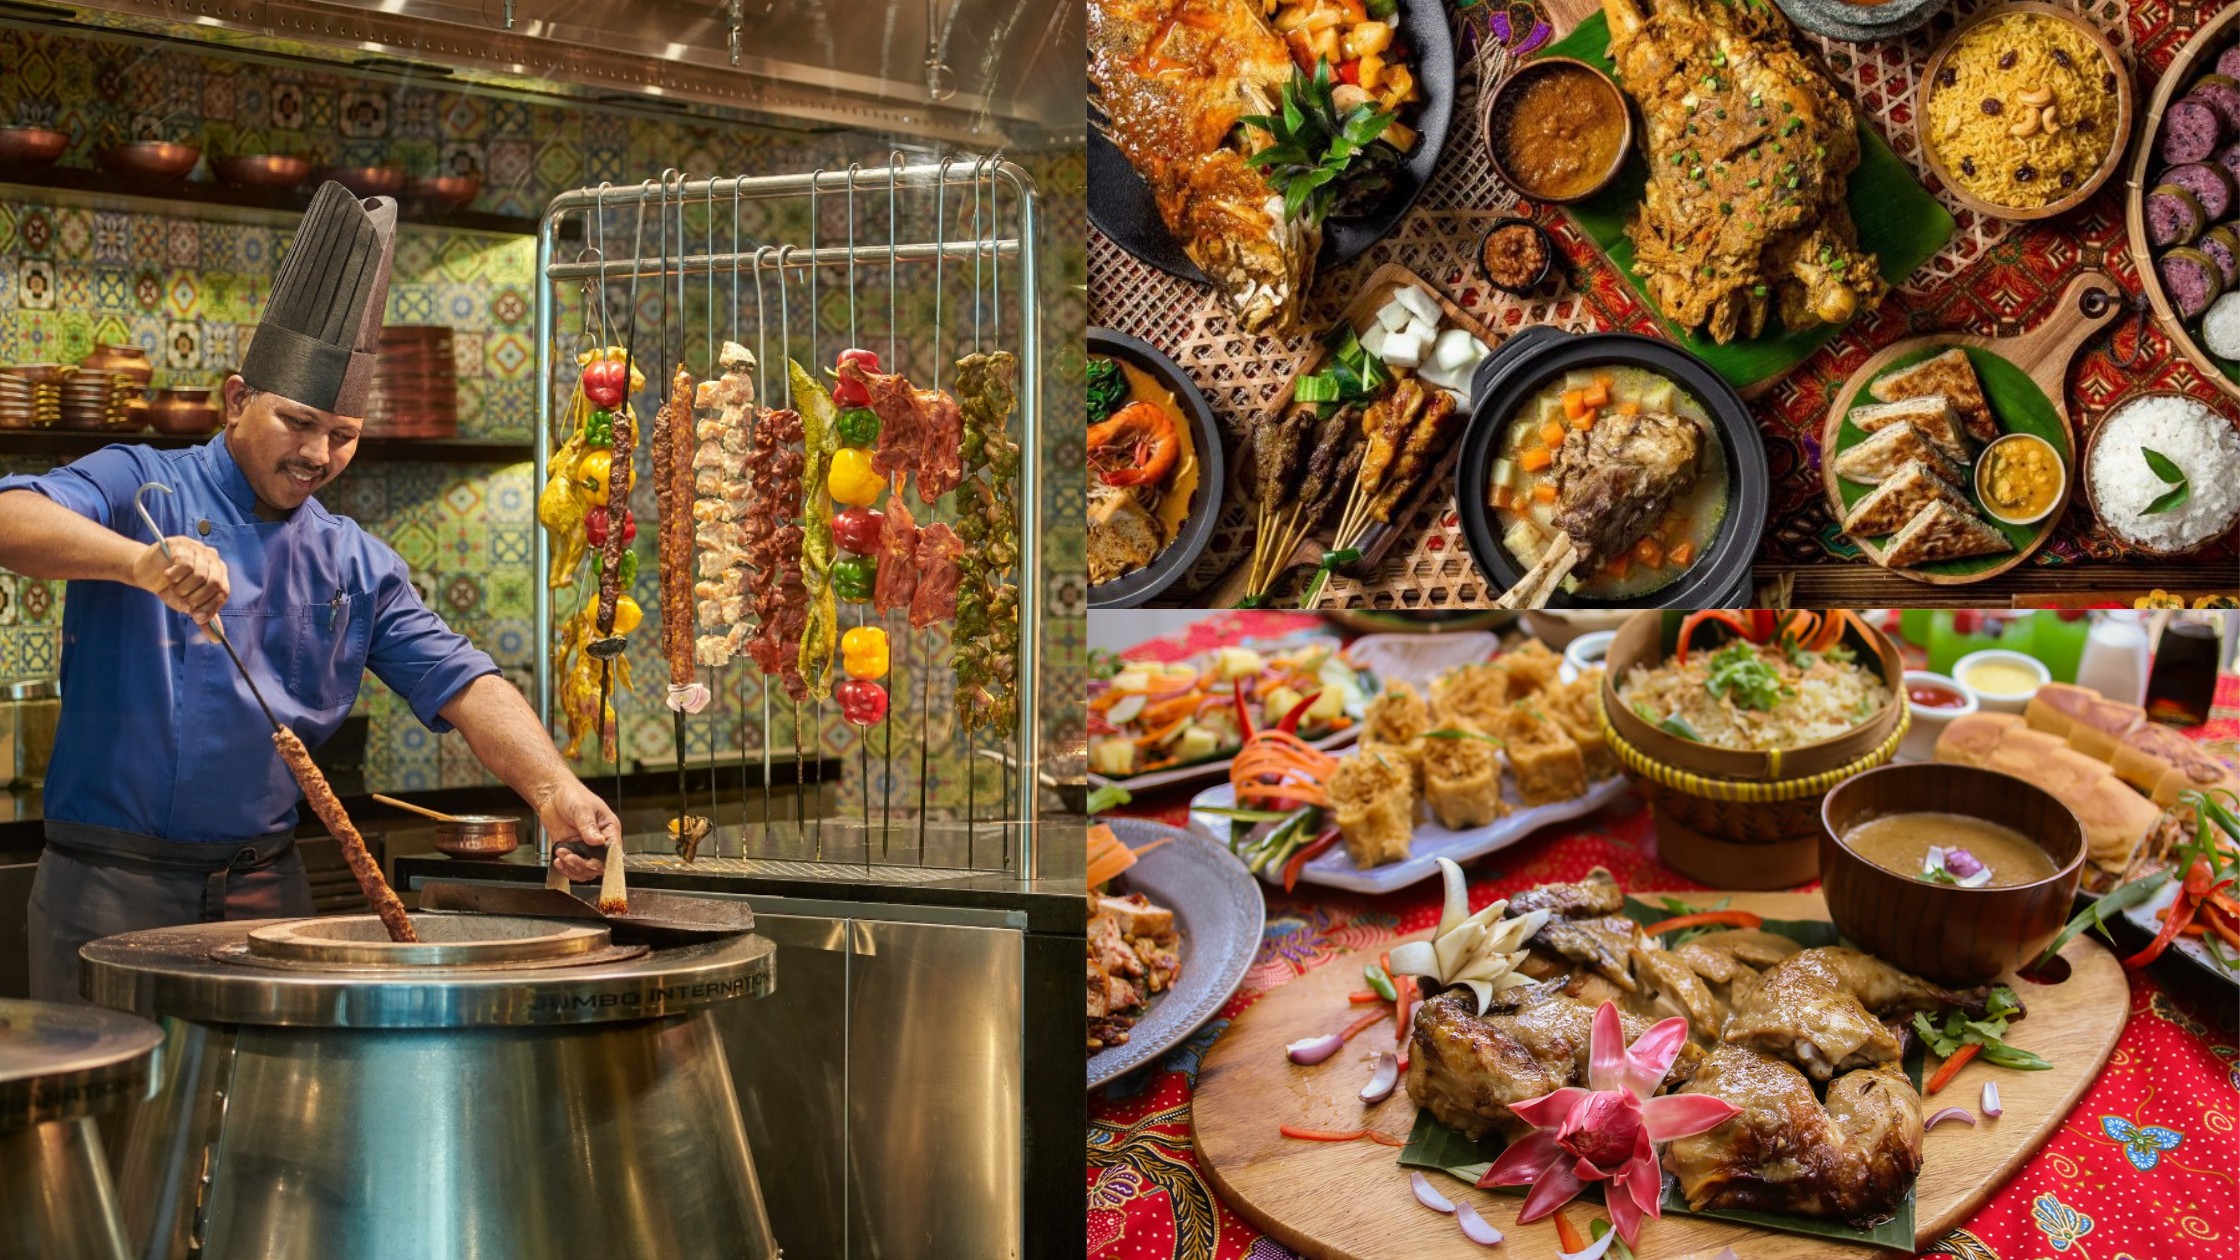 16 Best Ramadan Buffets In Kl Pj 2021 Buka Puasa This Year With A Delicious Hotel Buffet Klook Travel Blogklook Travel